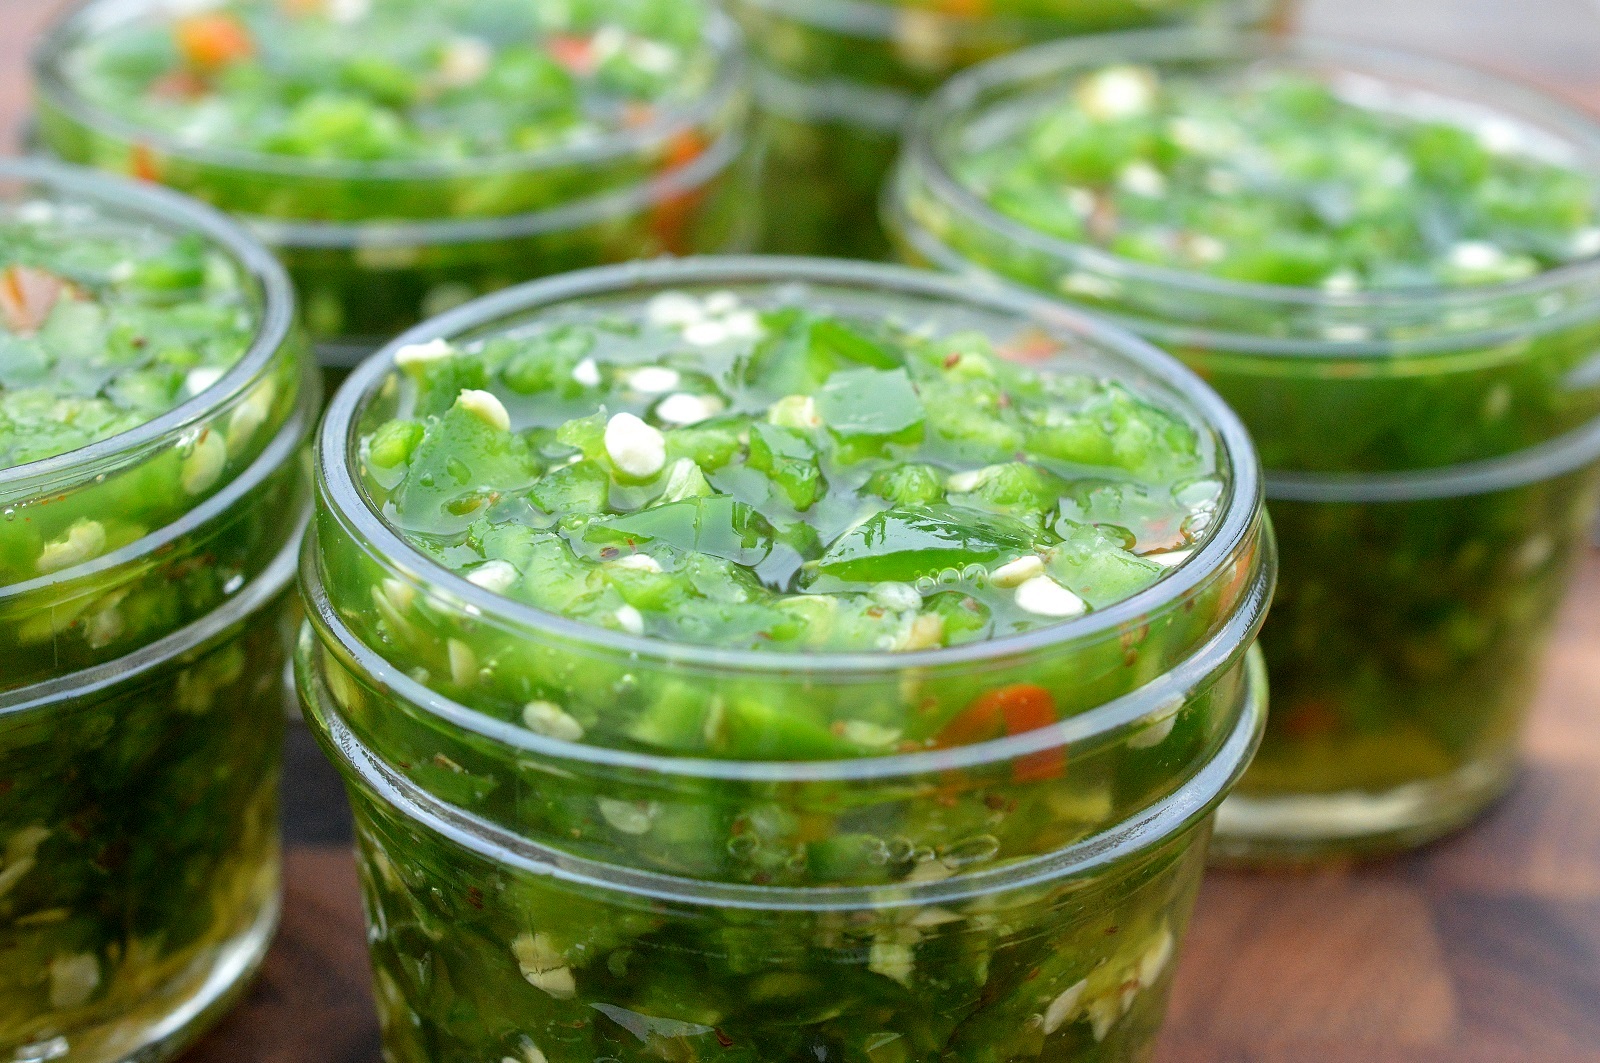 Jalapeno Relish recipe made by quick pickling, ready overnight and lasts for weeks. 